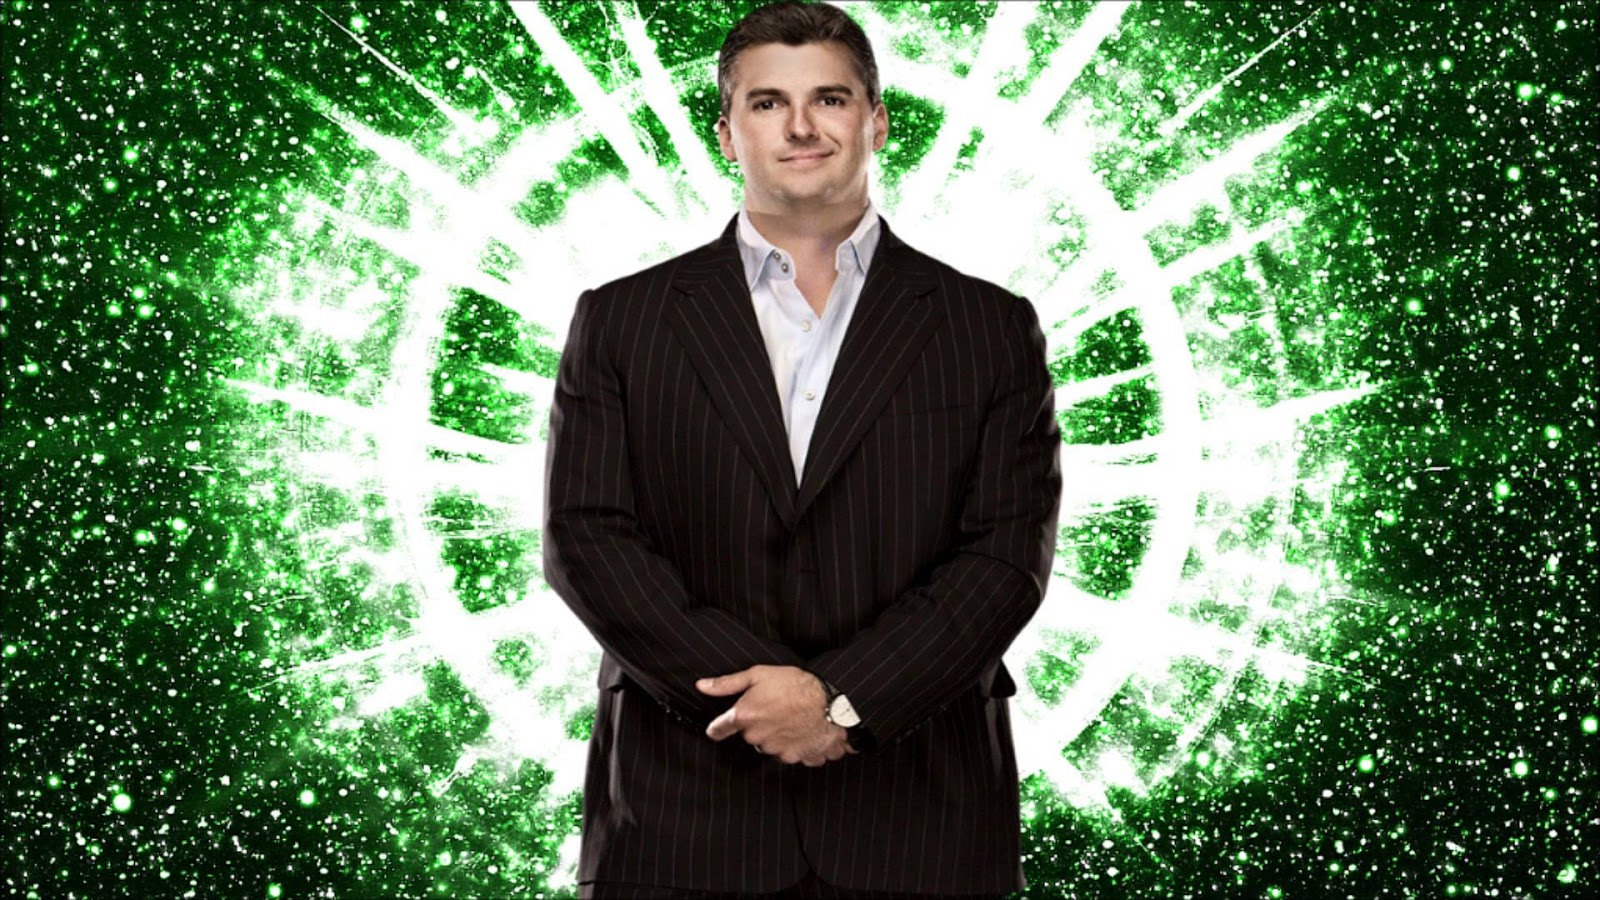 shane mcmahon wallpaper,green,suit,businessperson,formal wear,photography